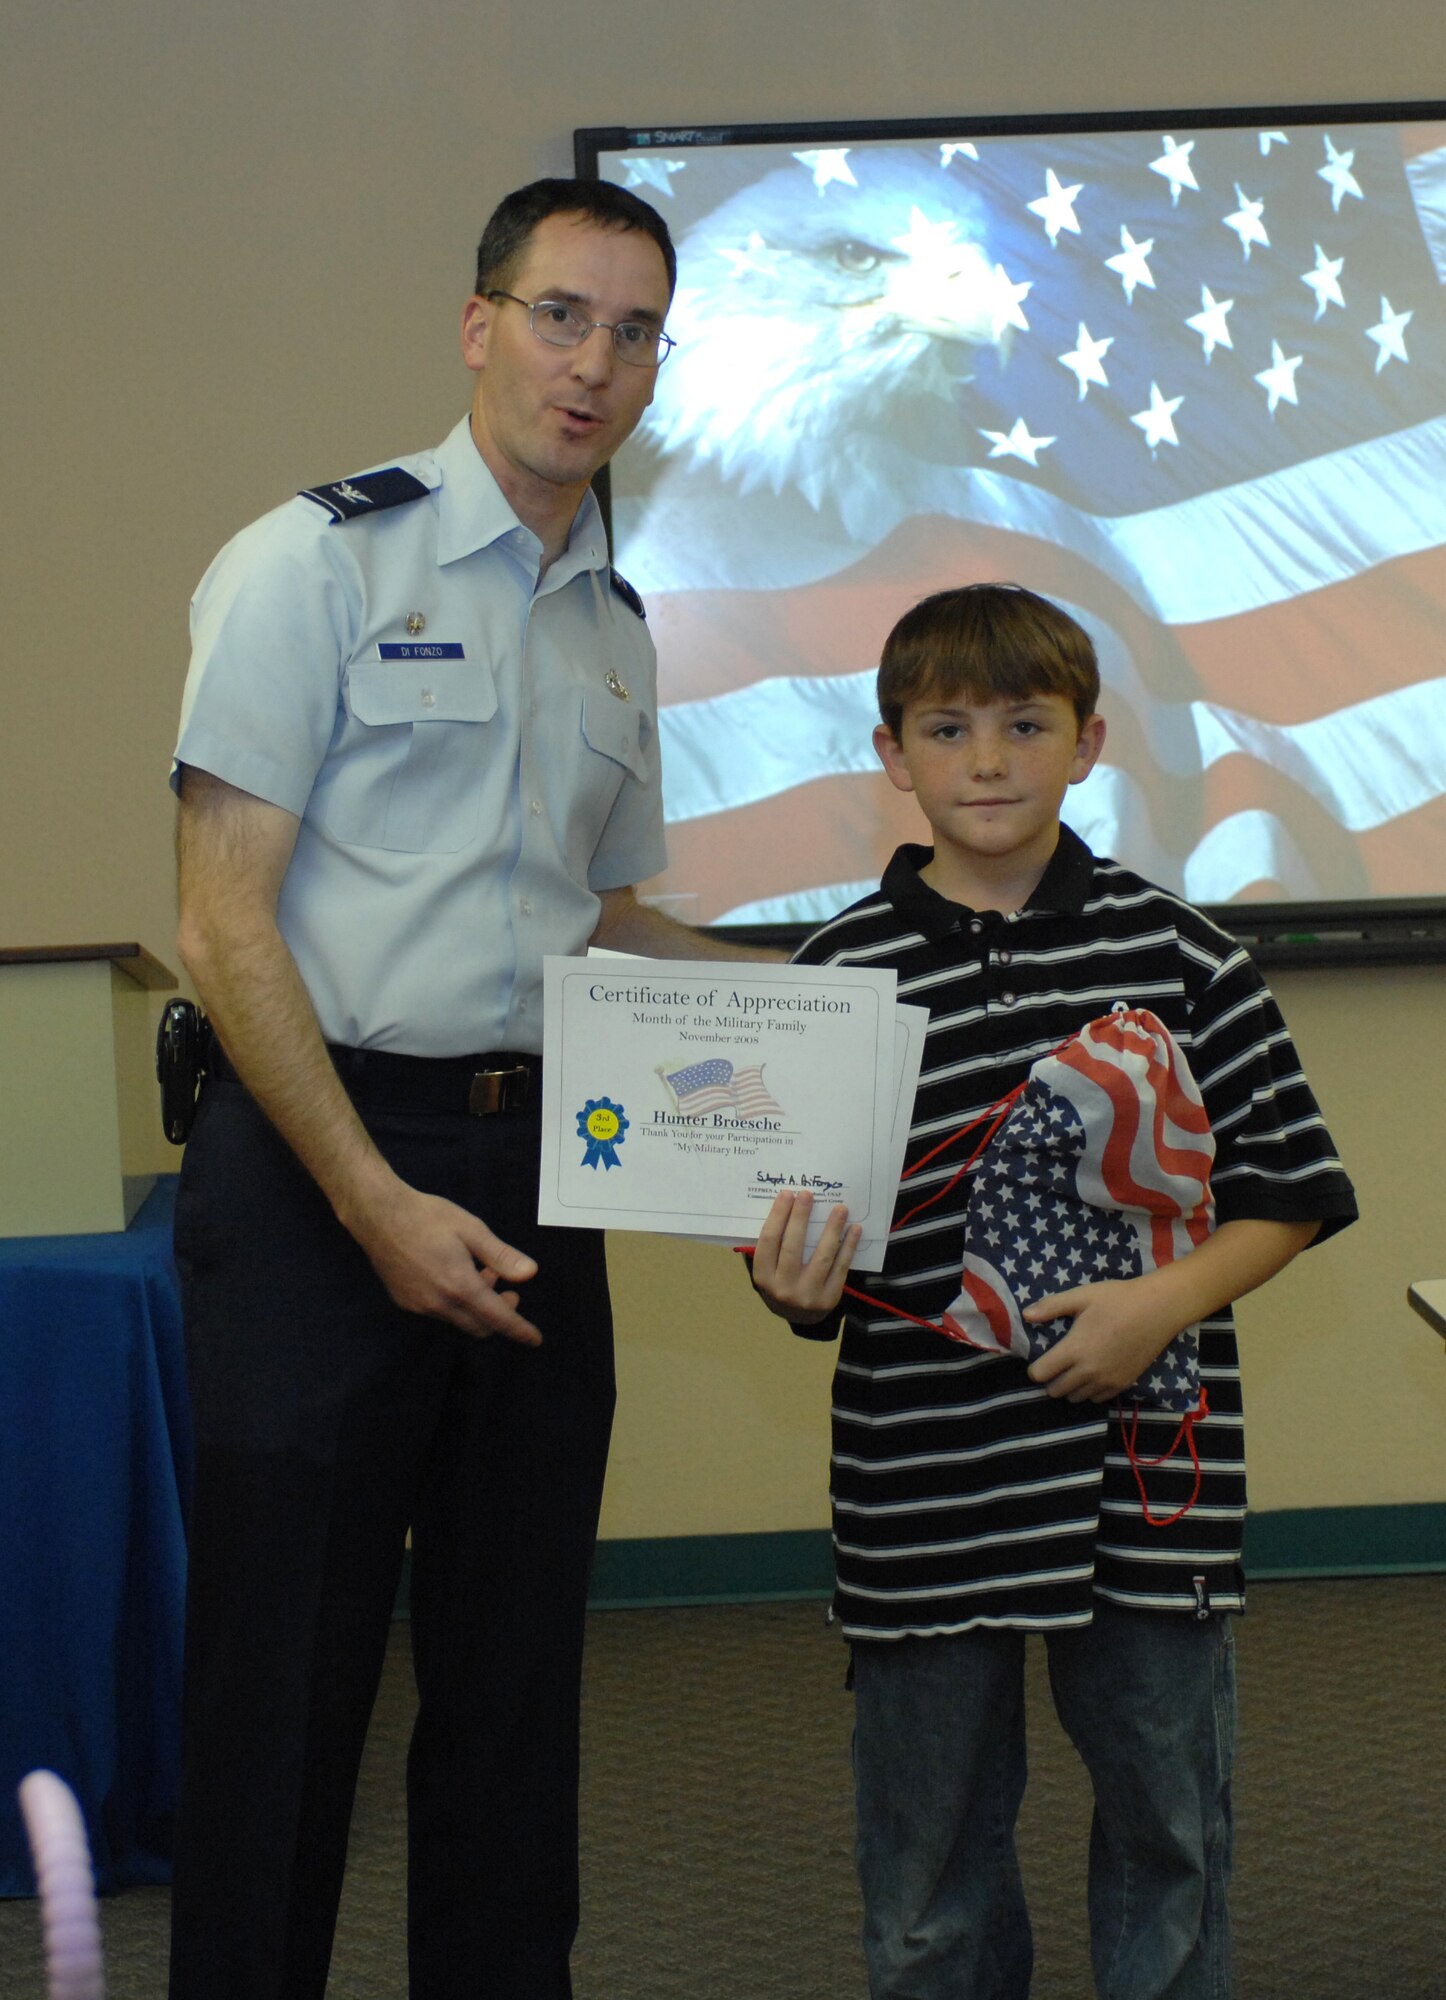 Col. Stephen DiFonzo, 49th Mission Support Group commander, presents an award to Hunter Broesche for winning 3rd place in the 7 - 12 year old category of the essay contest at the Airman and Family Readiness Center at Holloman Air Force Base, N.M., Nov. 24. The theme for the essay contest was "My Military Hero" in support of Military Family Appreciation Month. (U.S. Air Force photo/Airman Sondra M. Escutia)